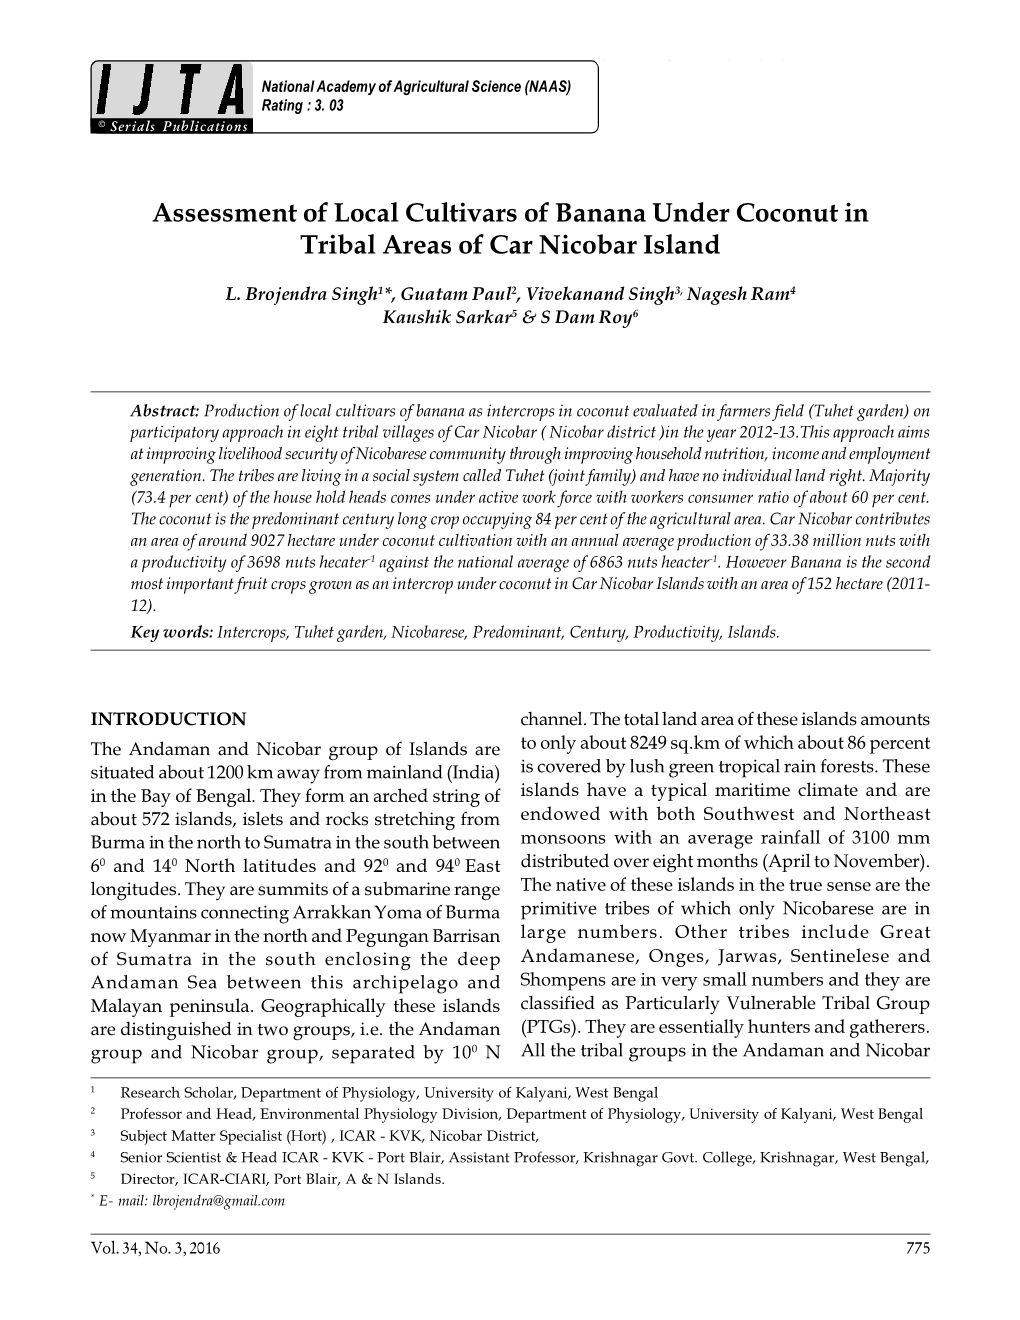 Assessment of Local Cultivars of Banana Under Coconut in Tribal Areas of Car Nicobar Island National Academy of Agricultural Science (NAAS) Rating : 3